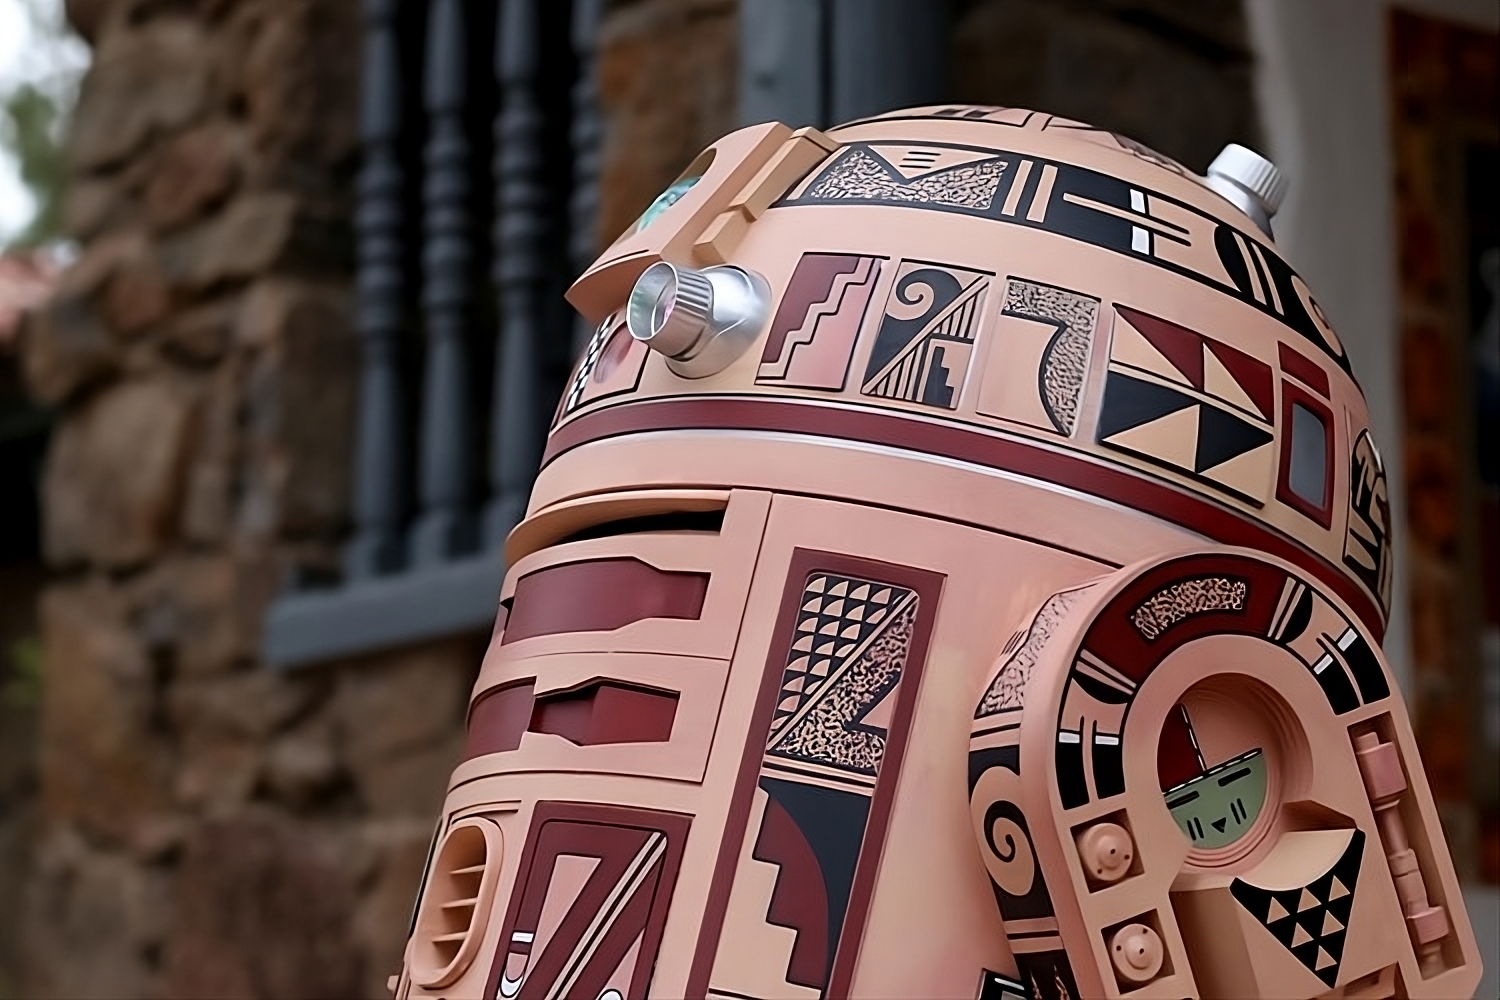 An R2D2 sculpture designed by a Hopi artist in front of a building.